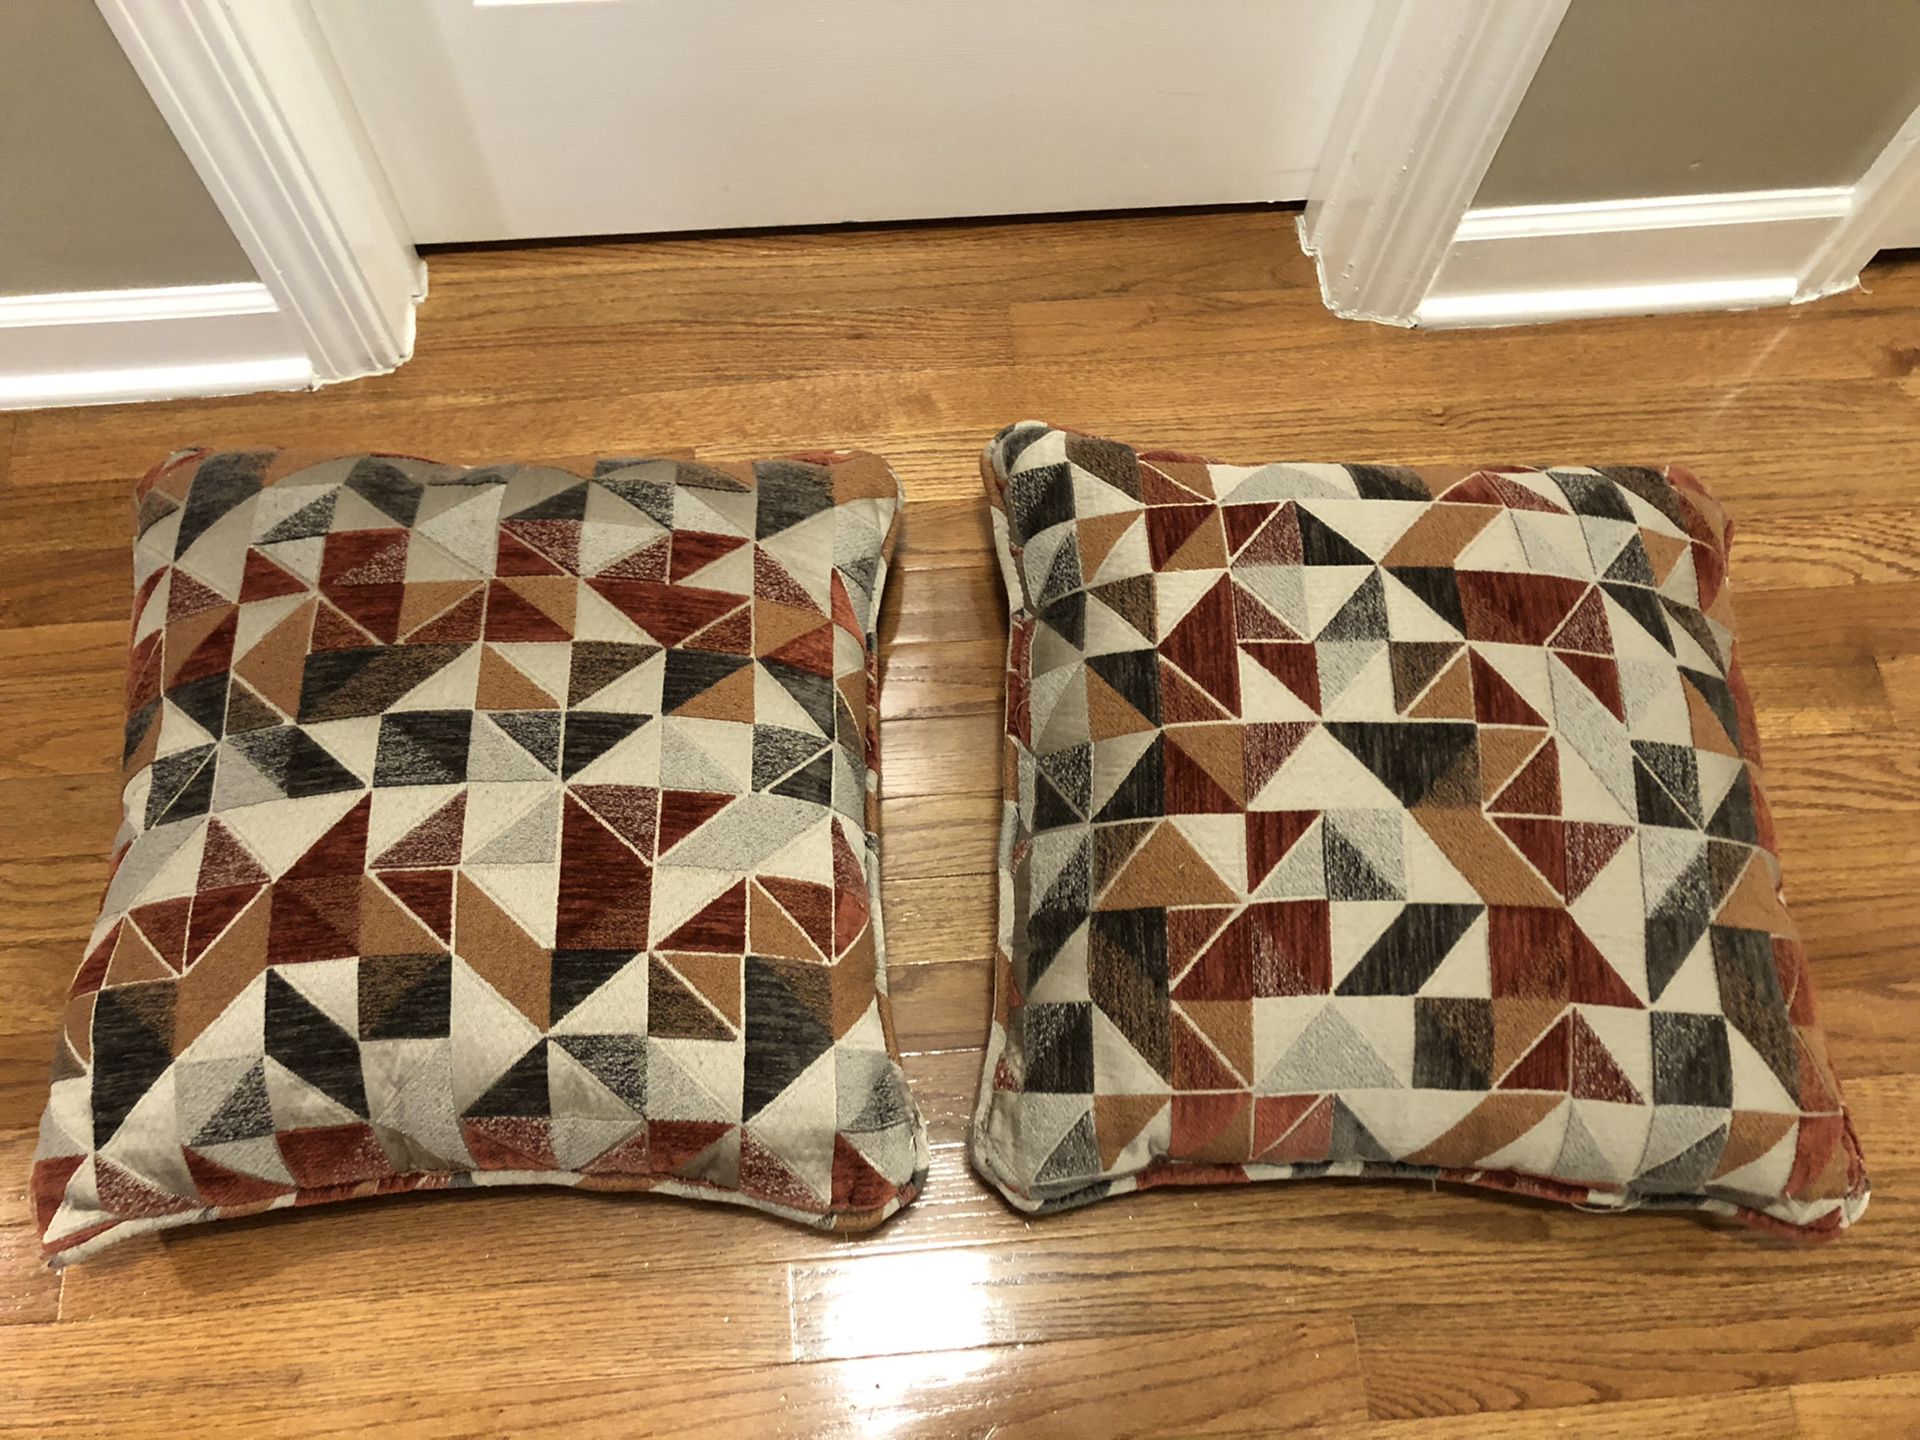 Set of 2 Couch Throw Decorative Pillows in red, orange, tan and brown tones in fair condition , $5 for both. Pickup in Apex